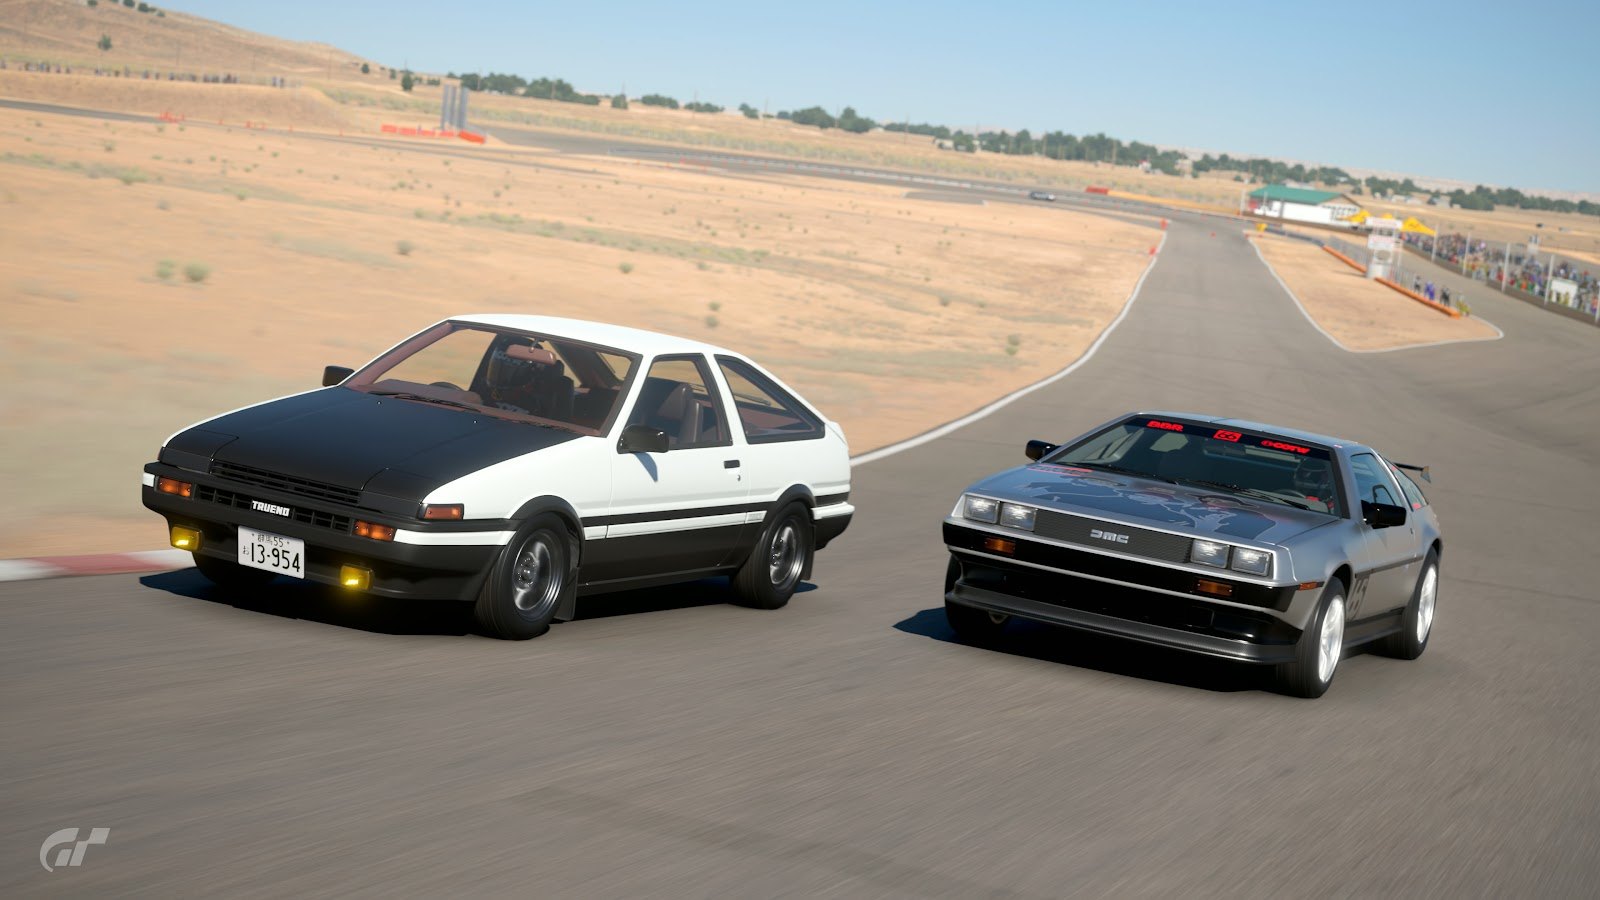 Toyota Taps Into The AE86's Anime Fame With Initial D-Inspired GR86  Commercials